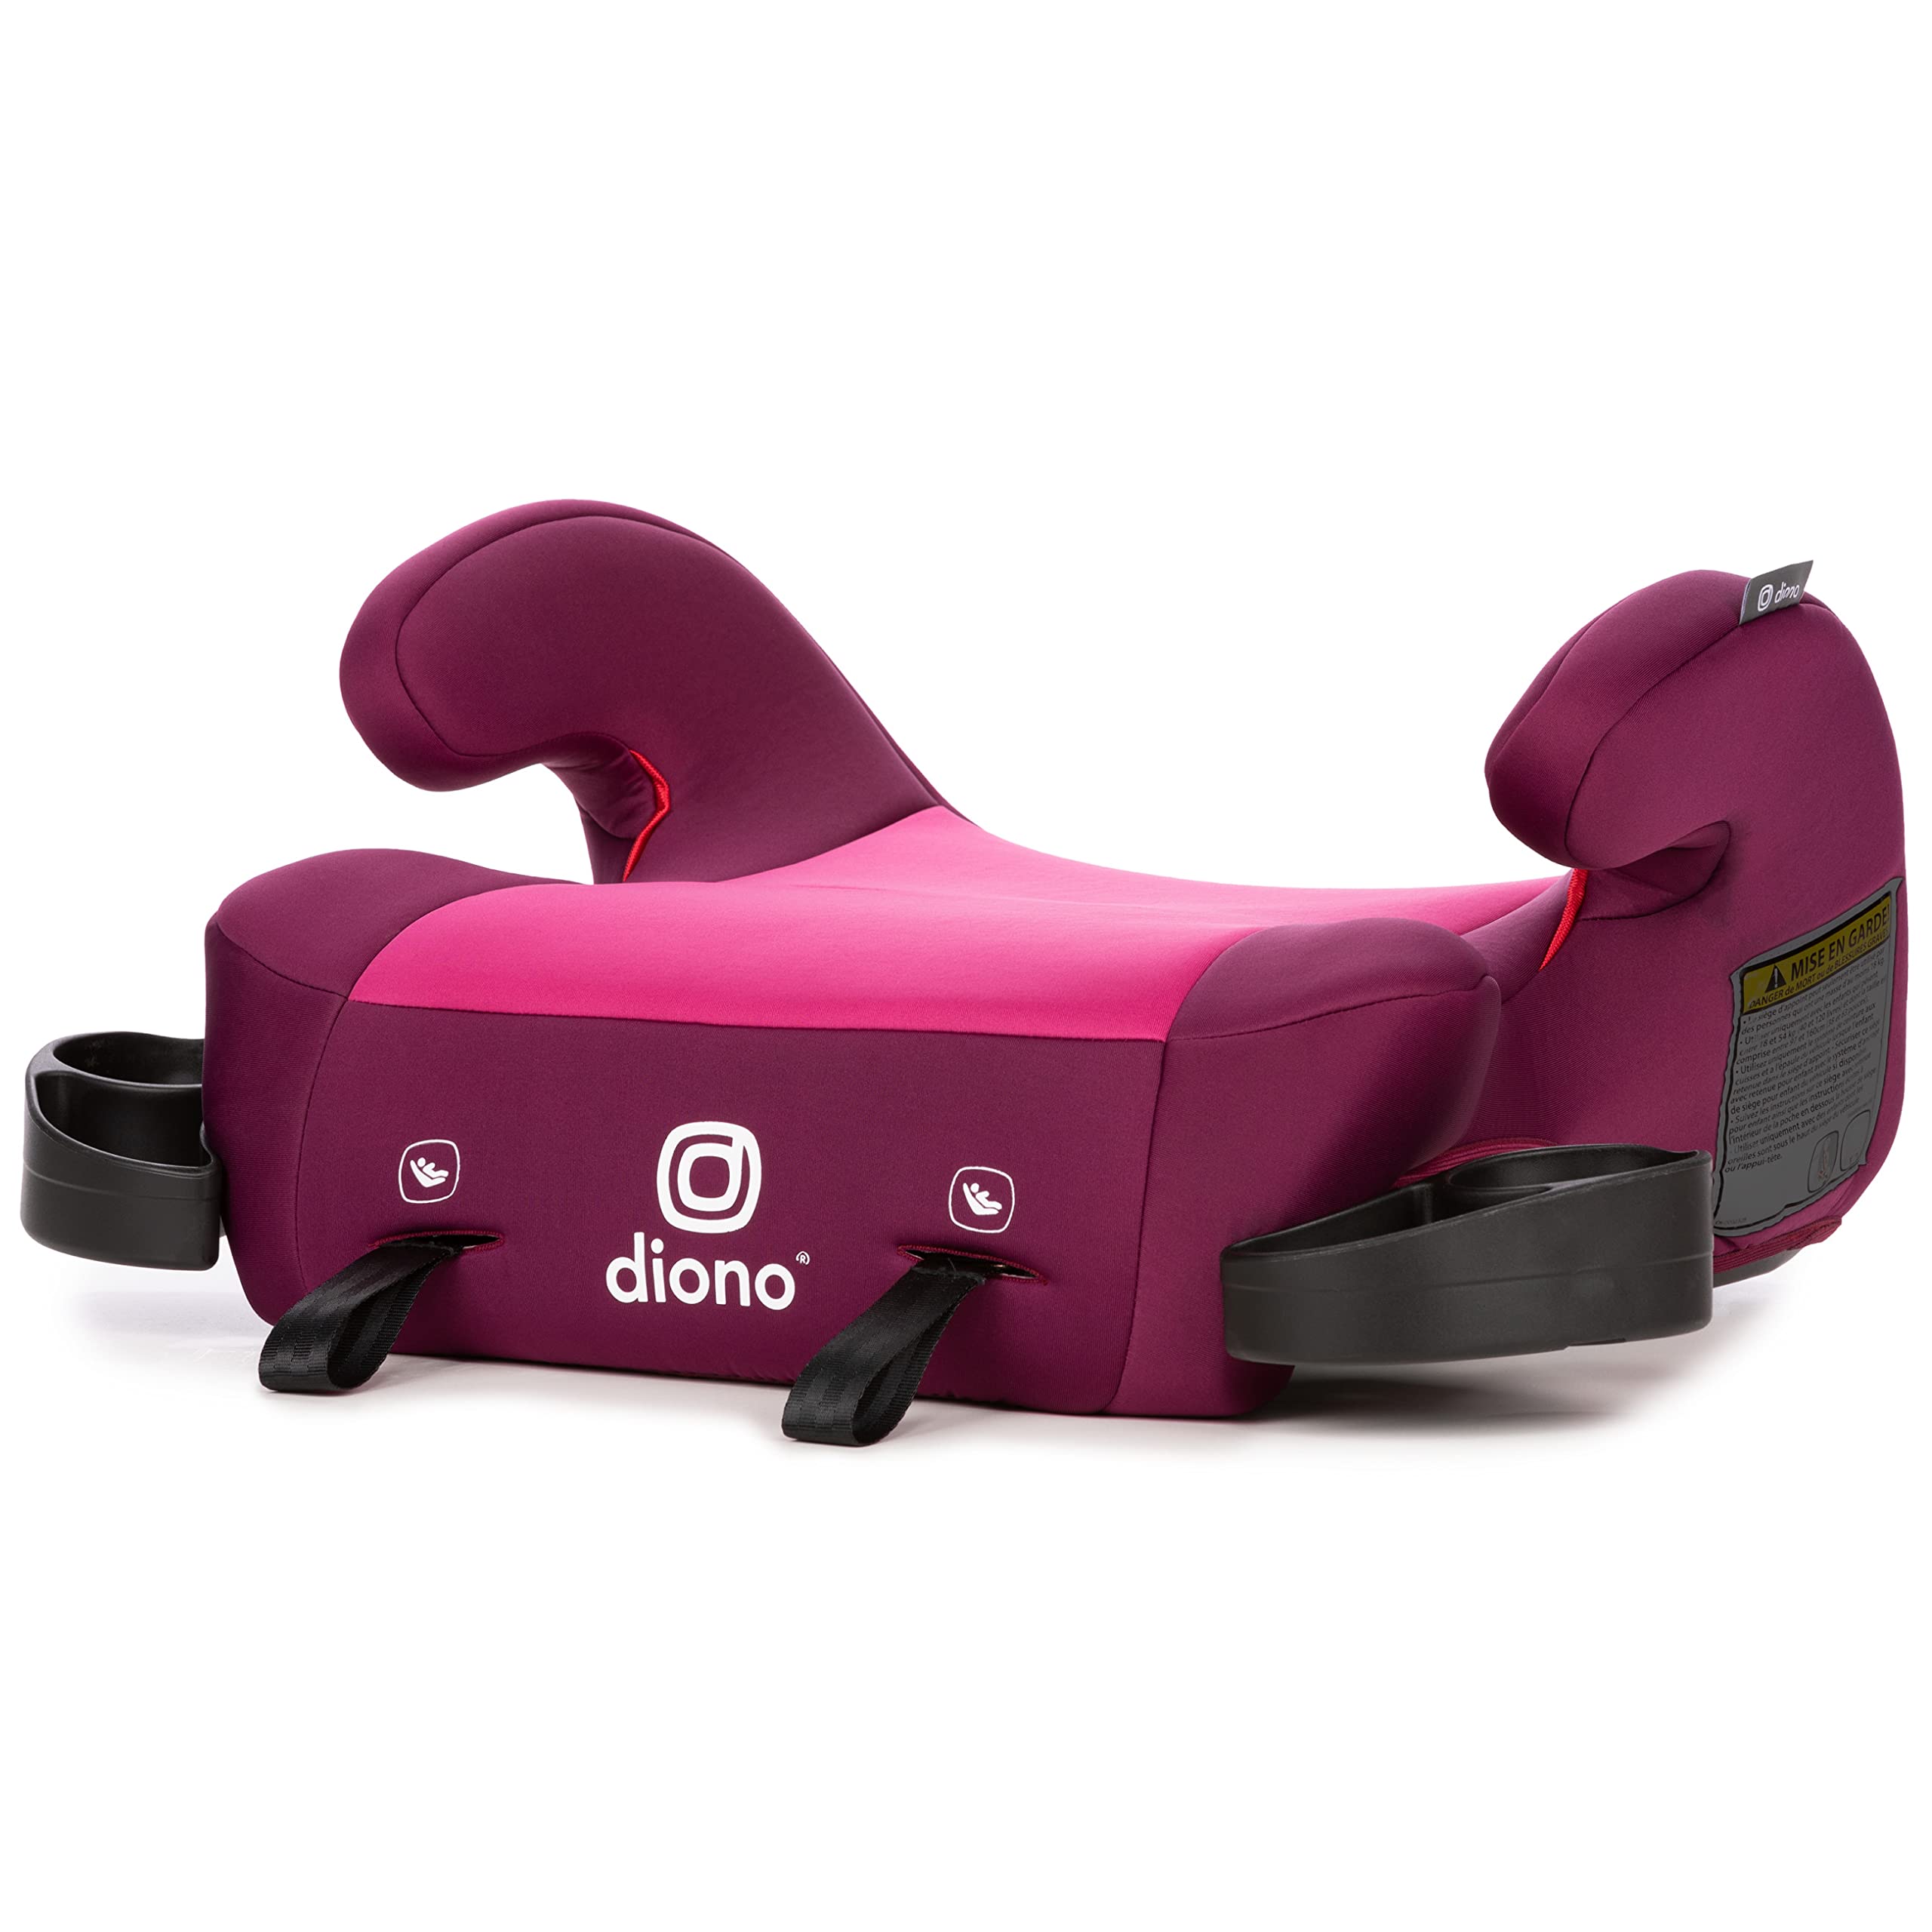 Diono Solana 2 XL 2022, Dual Latch Connectors, Lightweight Backless Belt-Positioning Booster Car Seat, 8 Years 1 Booster Seat, Pink